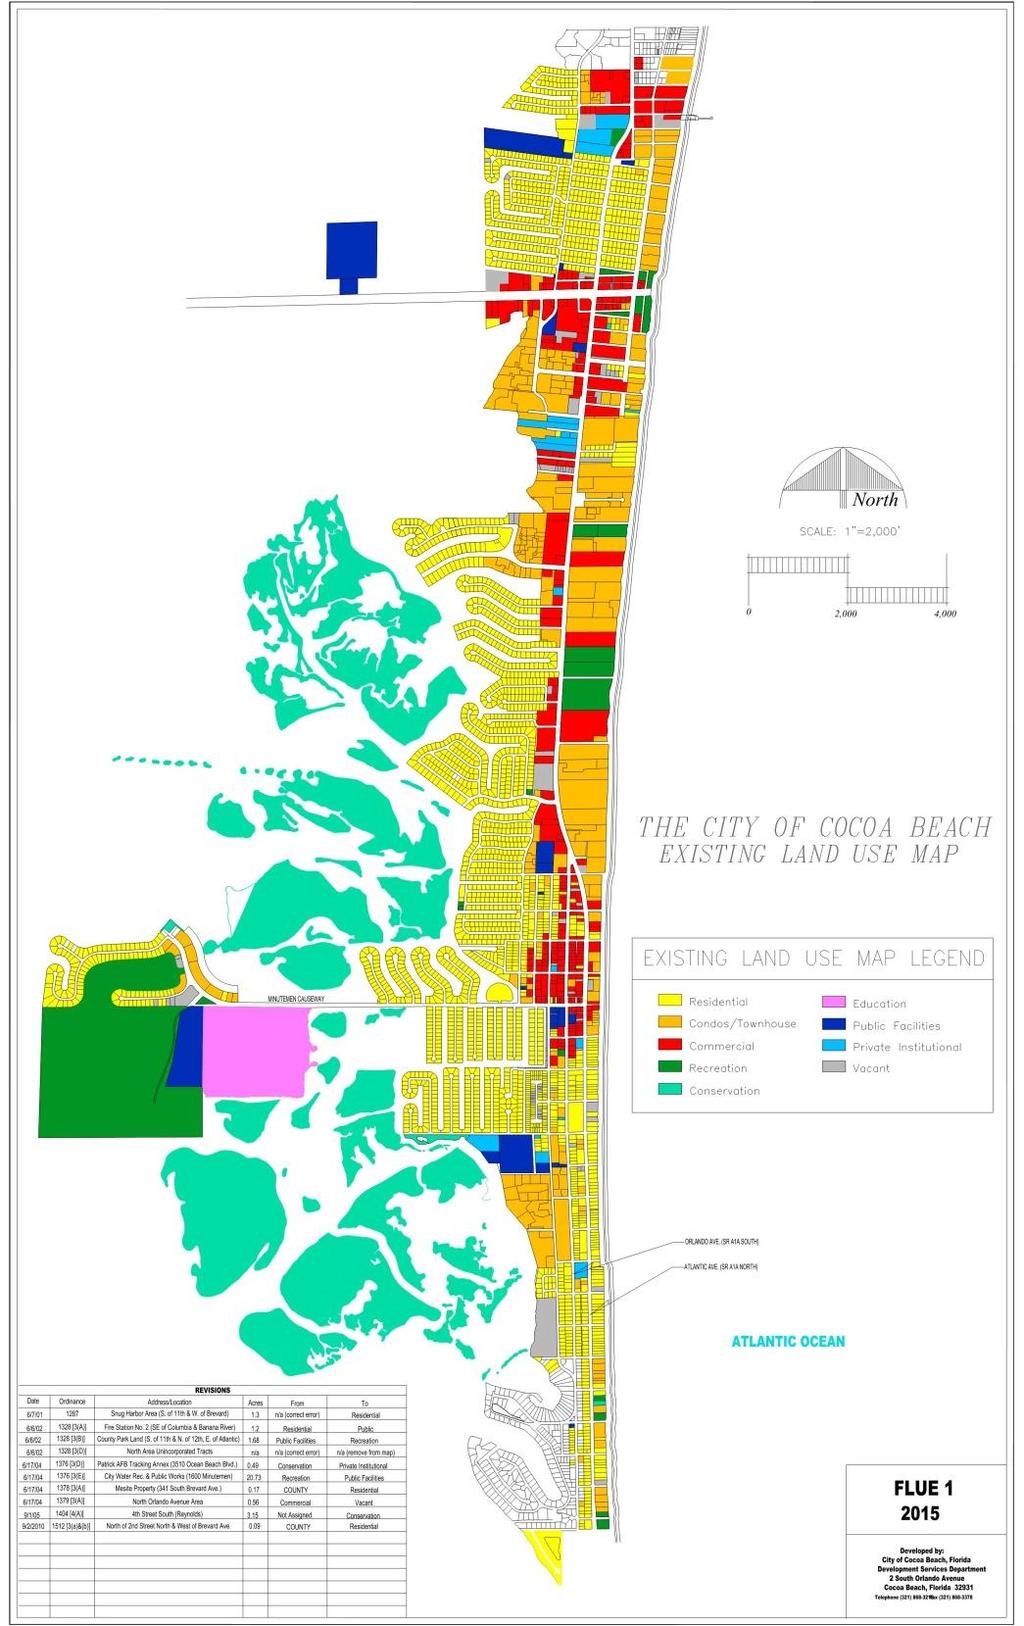 FLUE Map 1 Existing Land Use (2015) City of